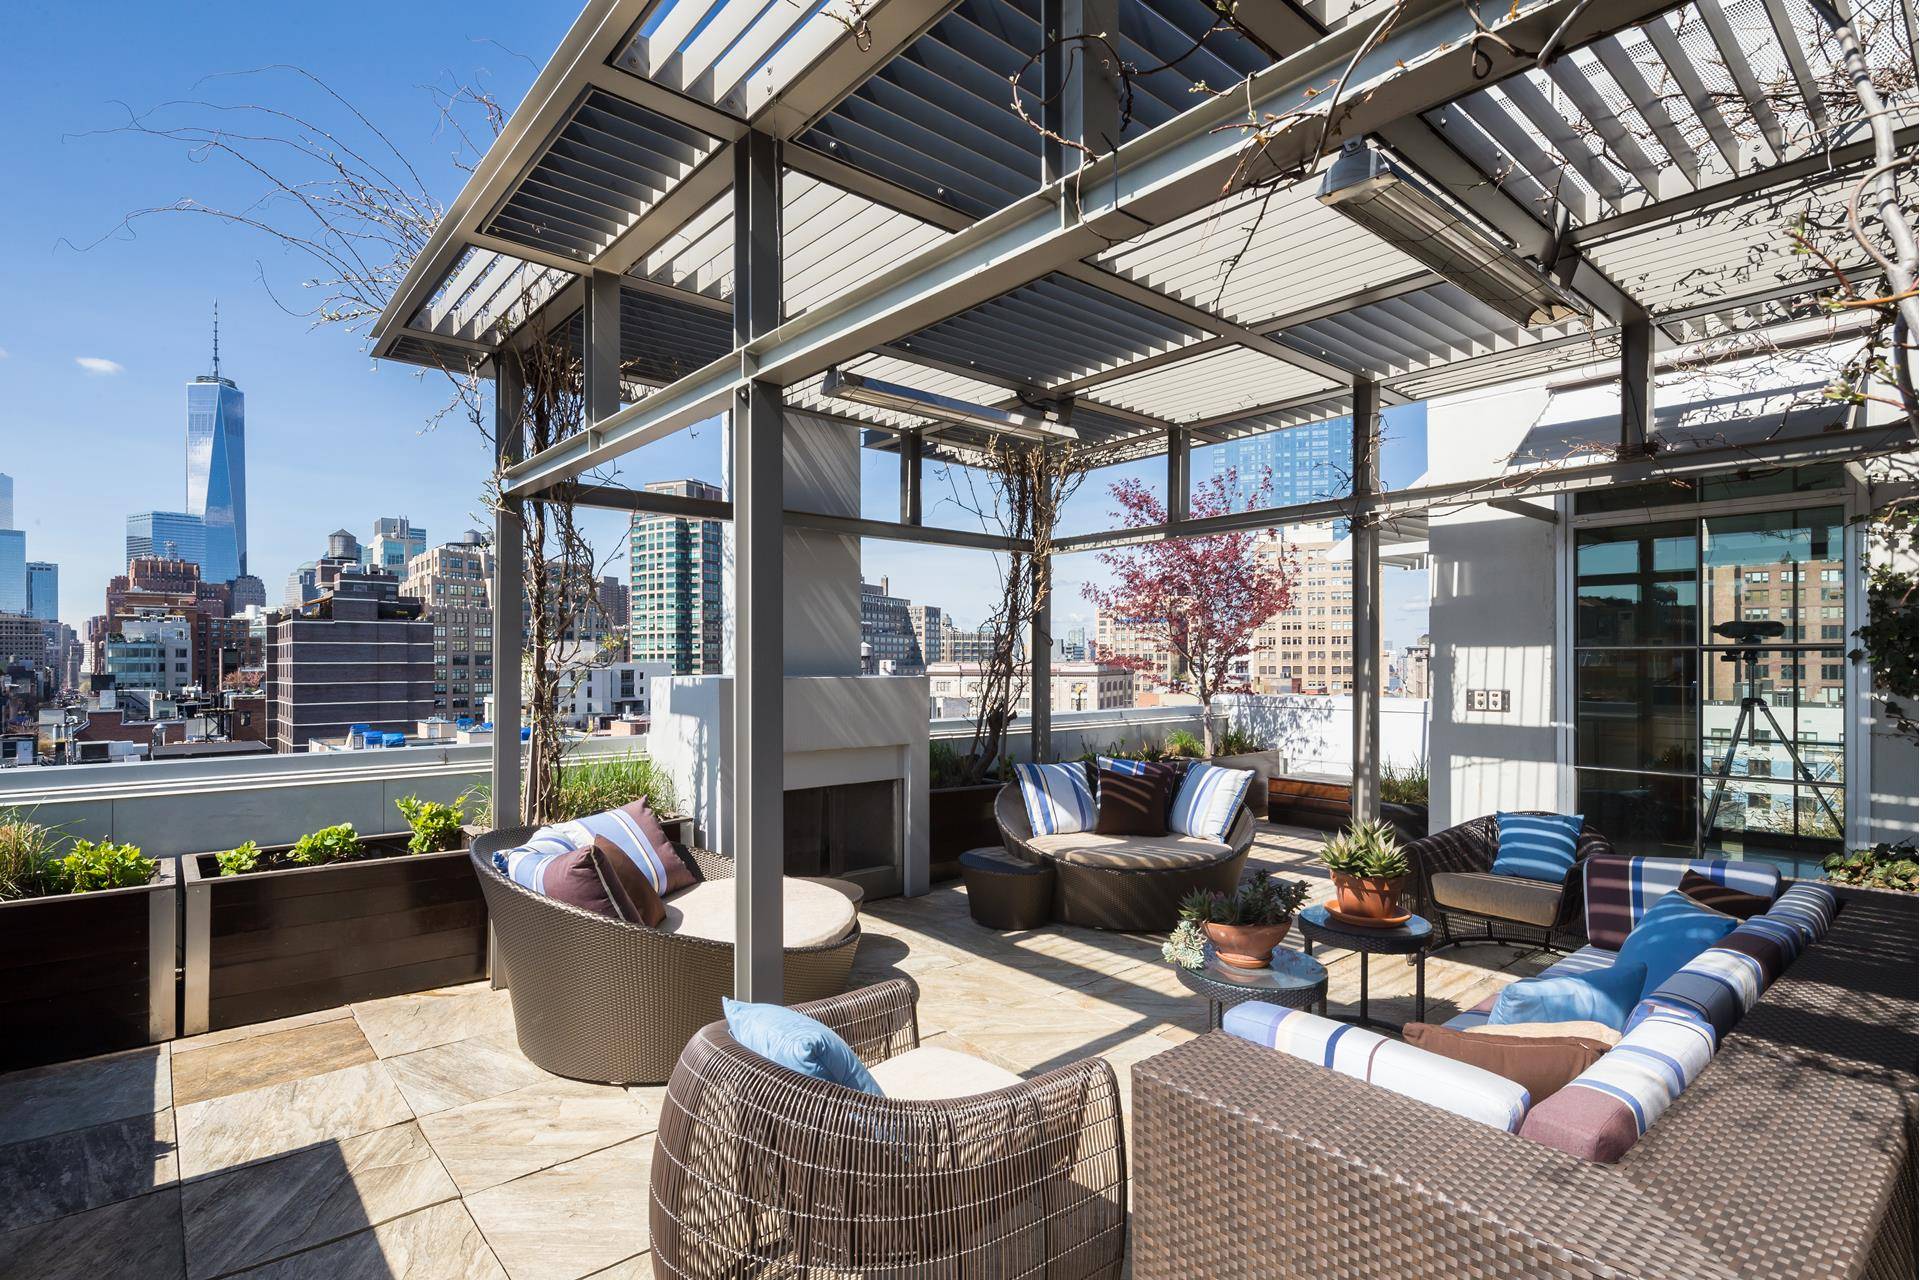 Located on a prime Soho block, this dramatic penthouse captivates hearts and minds with its elegant interiors and wealth of outdoor space.